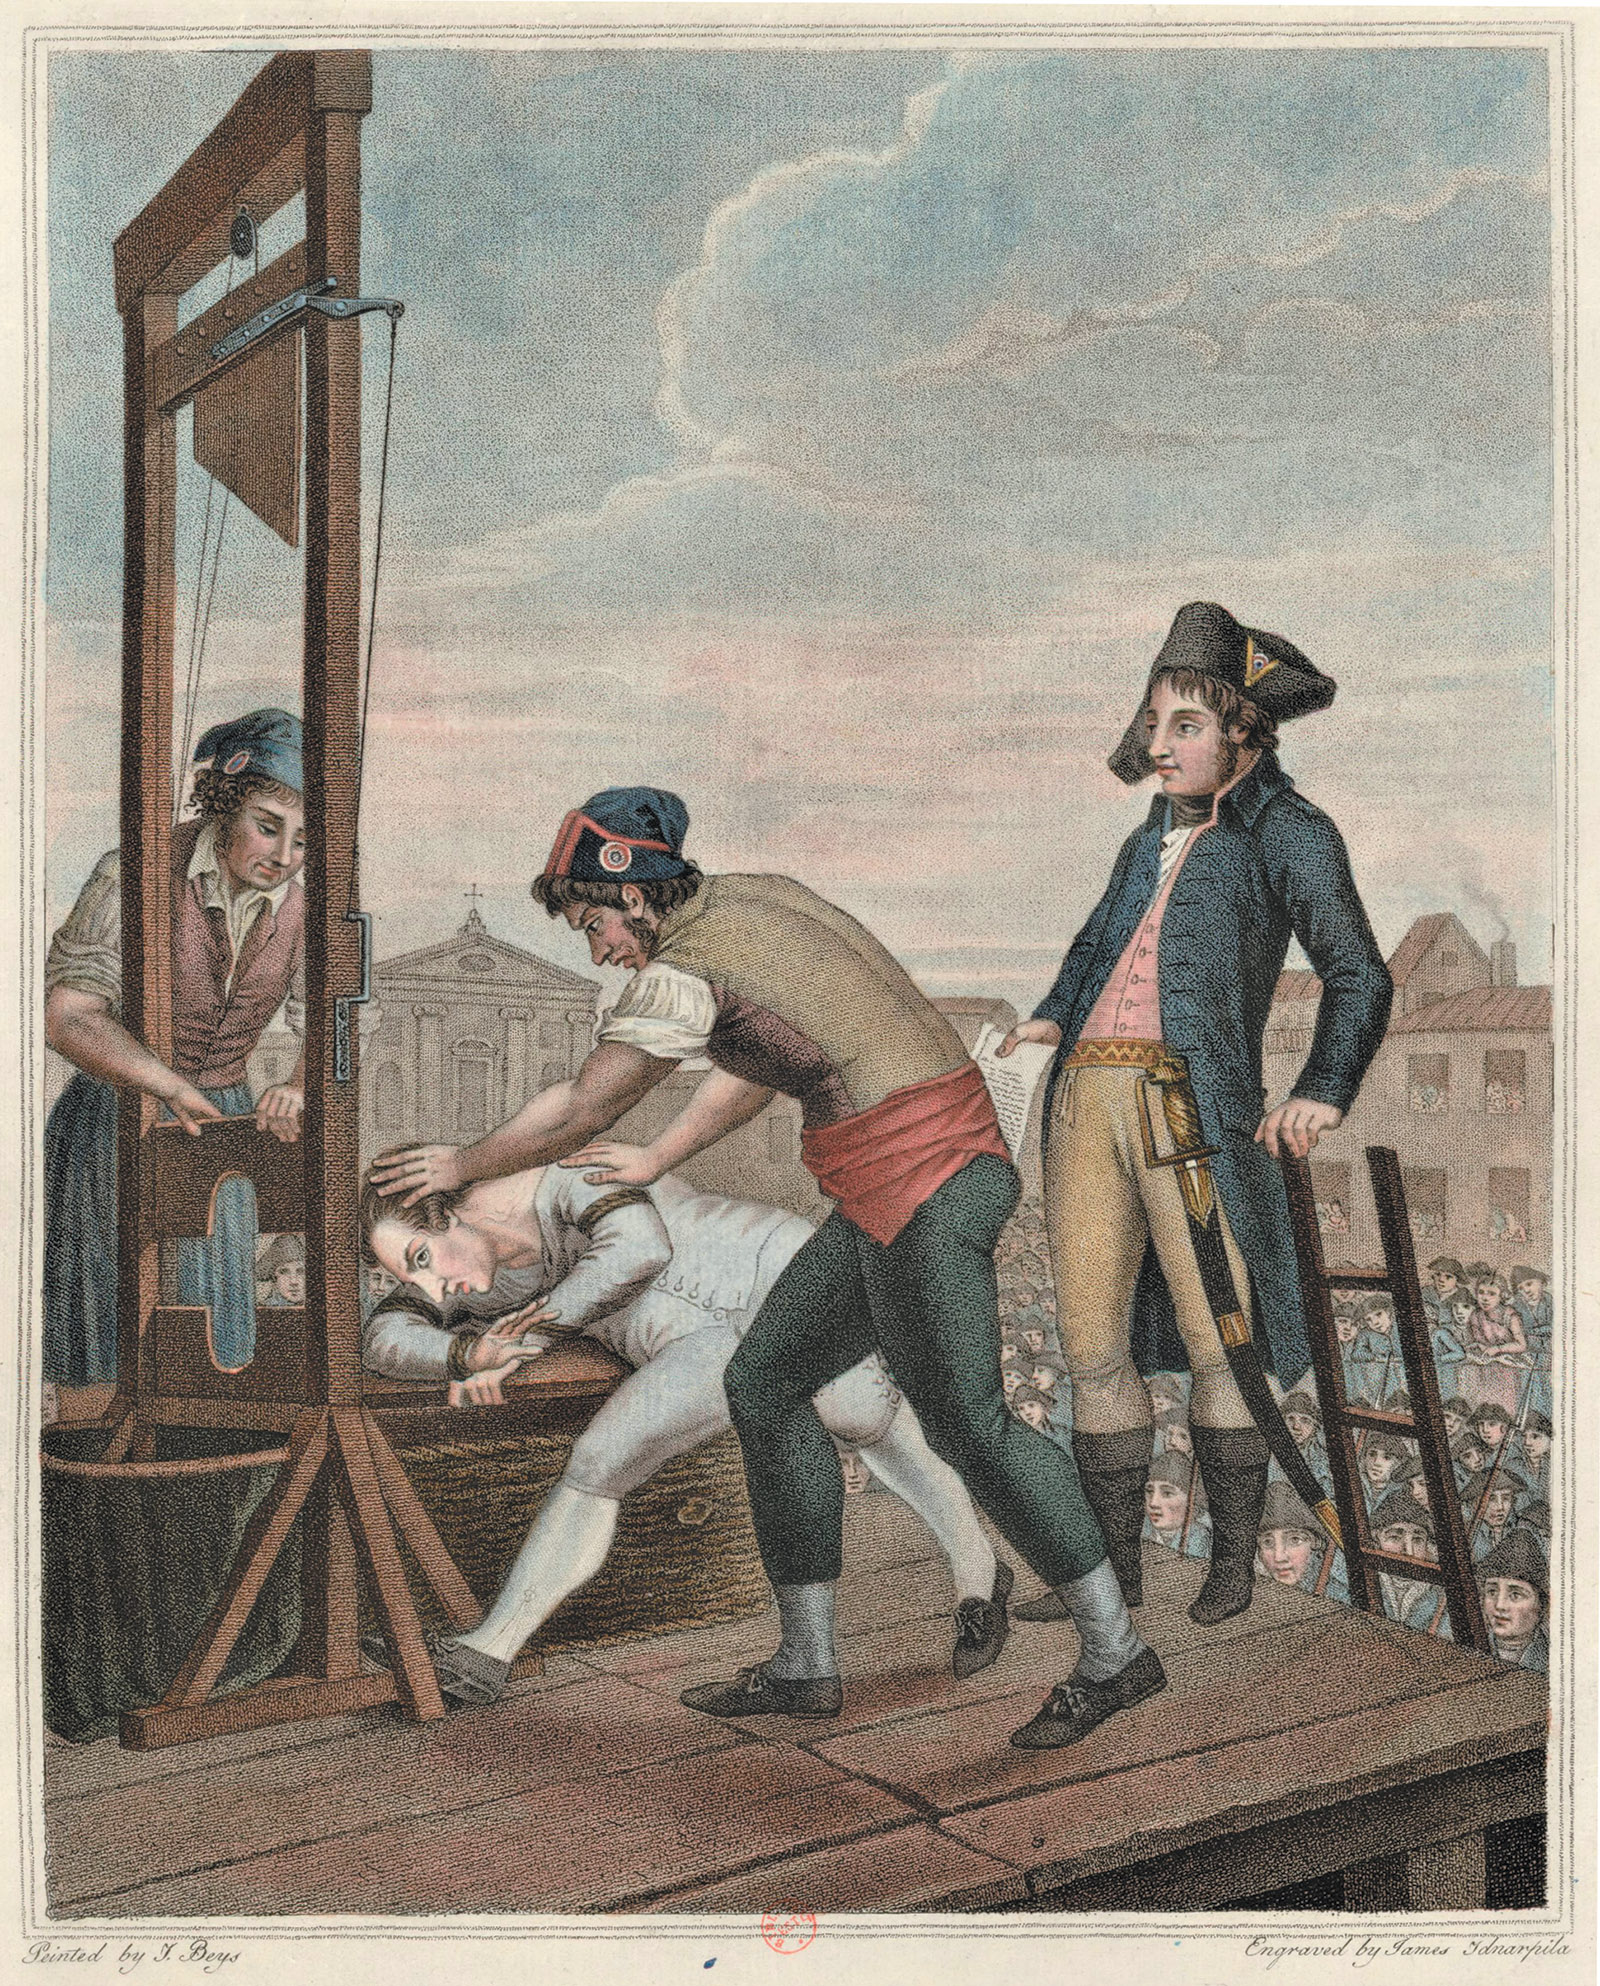 The execution of Robespierre